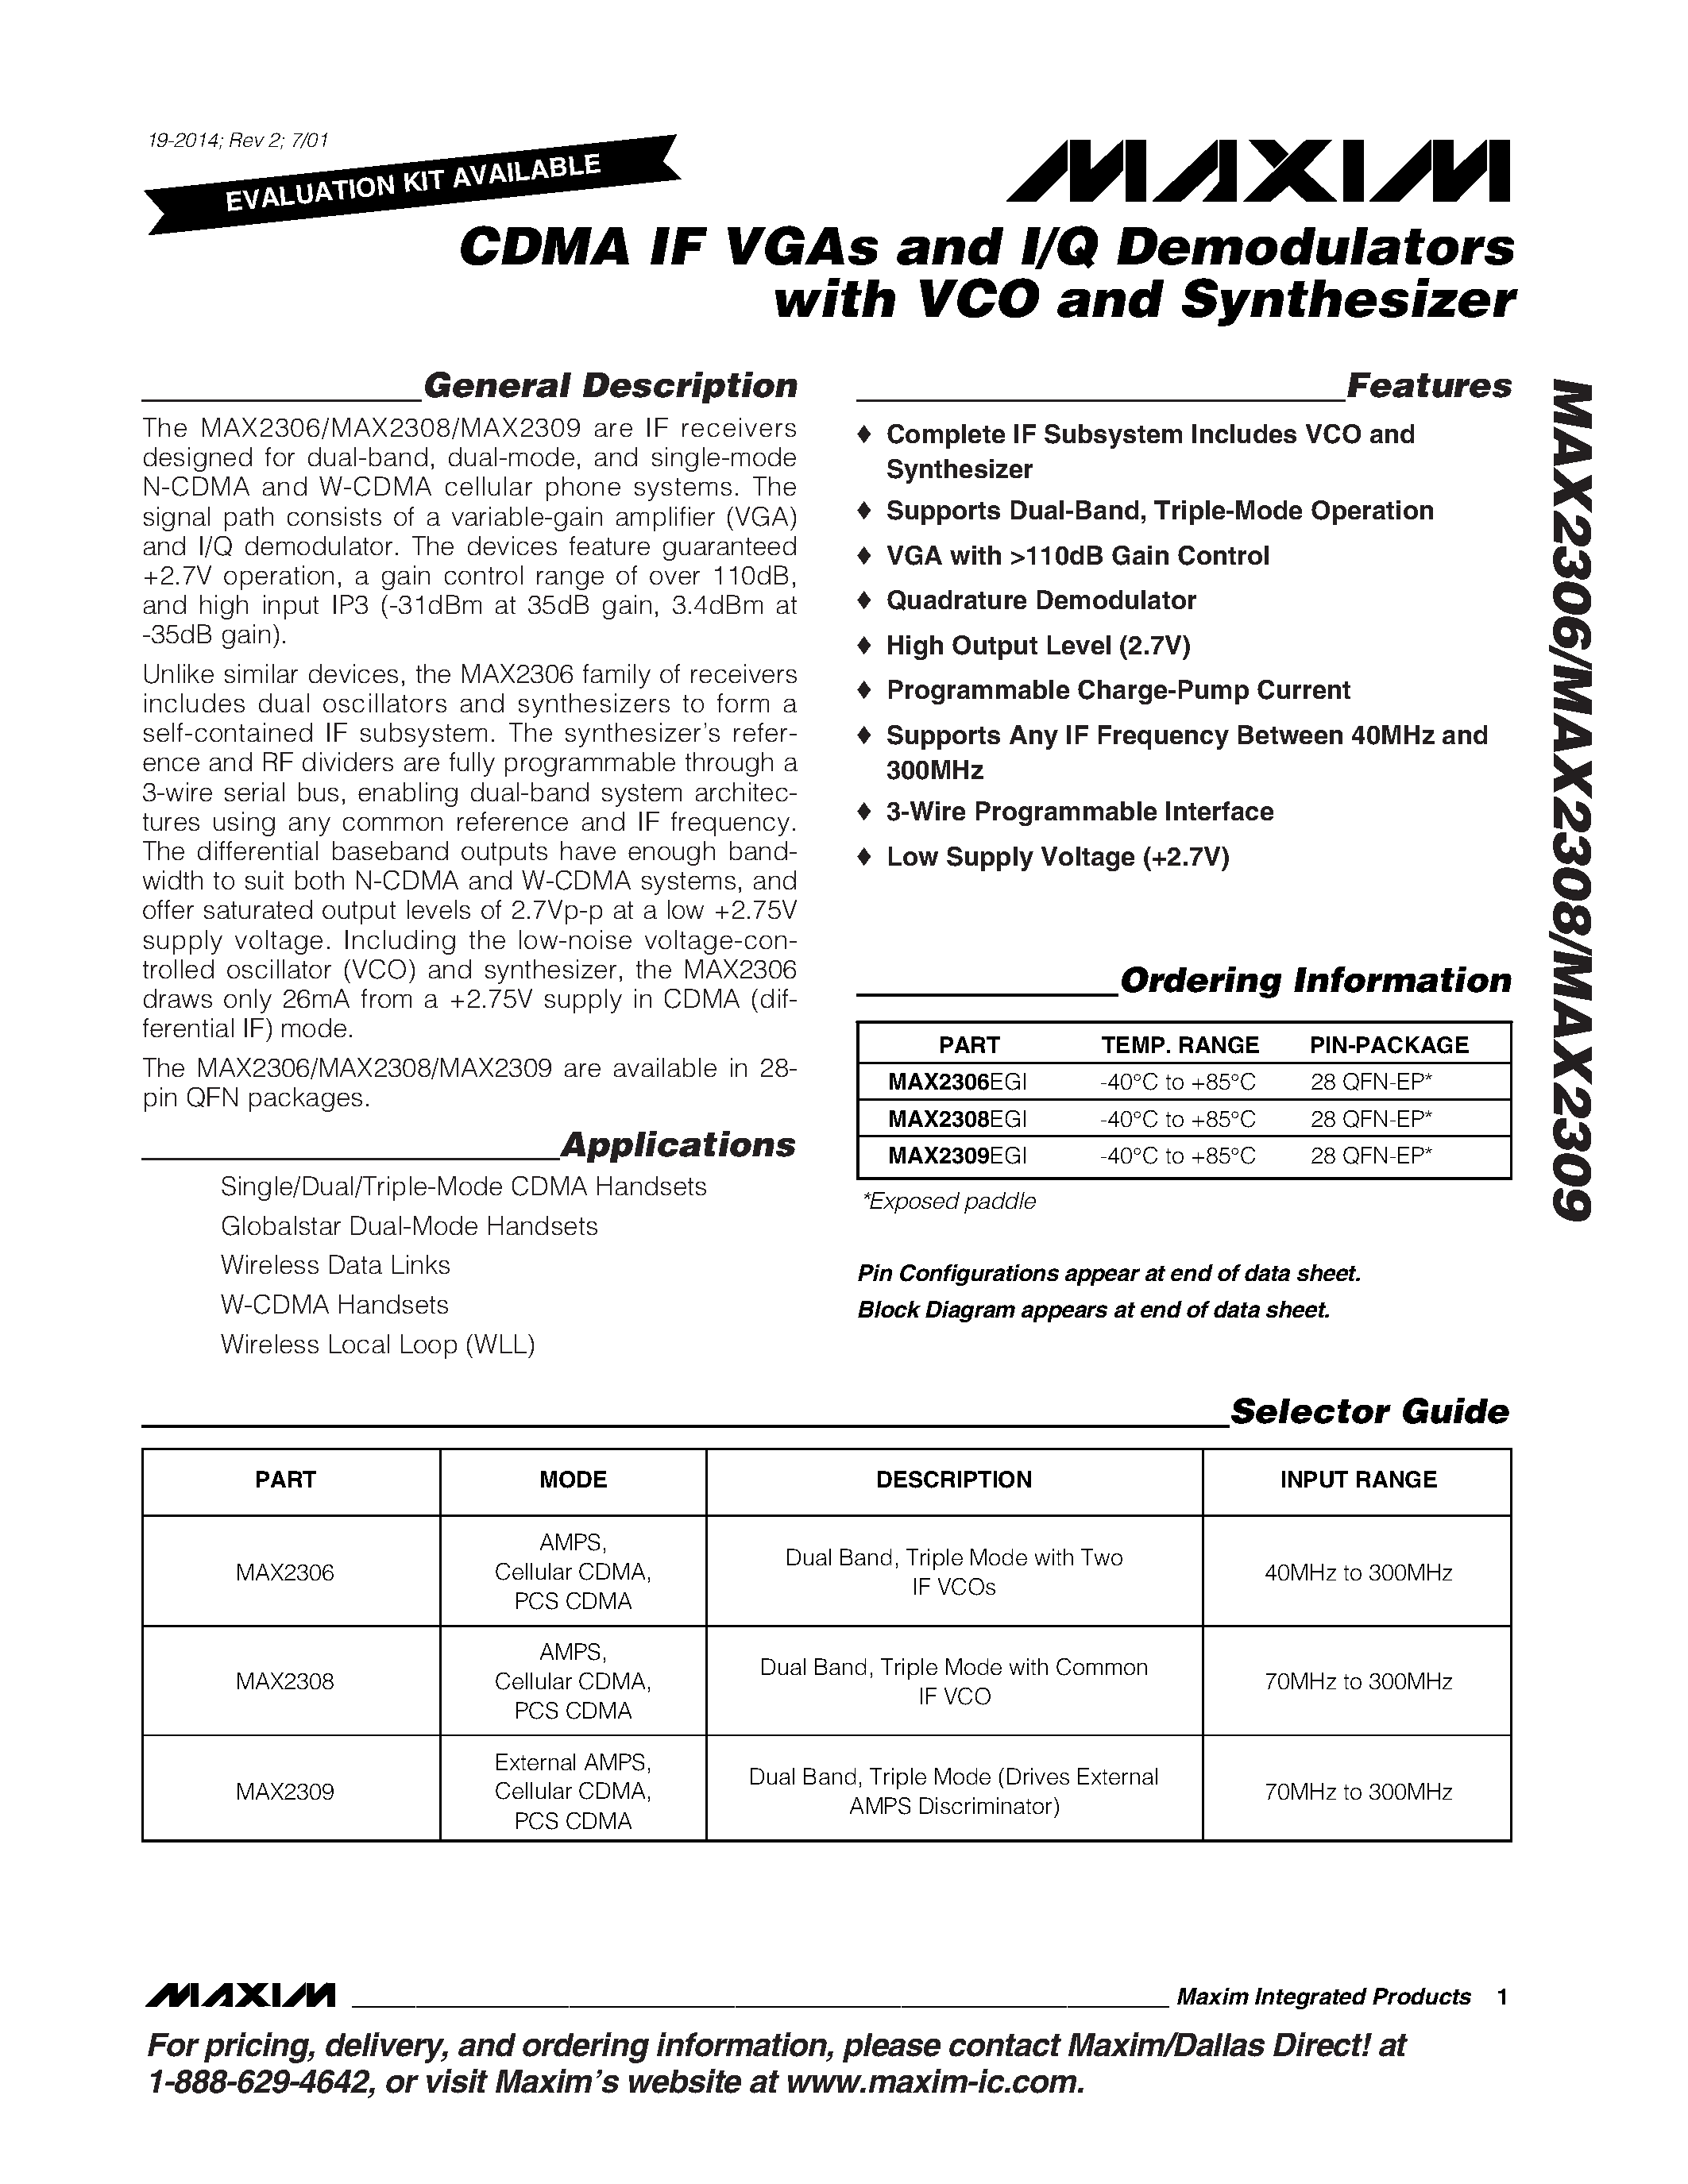 Datasheet MAX2308EGI - CDMA IF VGAs and I/Q Demodulators with VCO and Synthesizer page 1